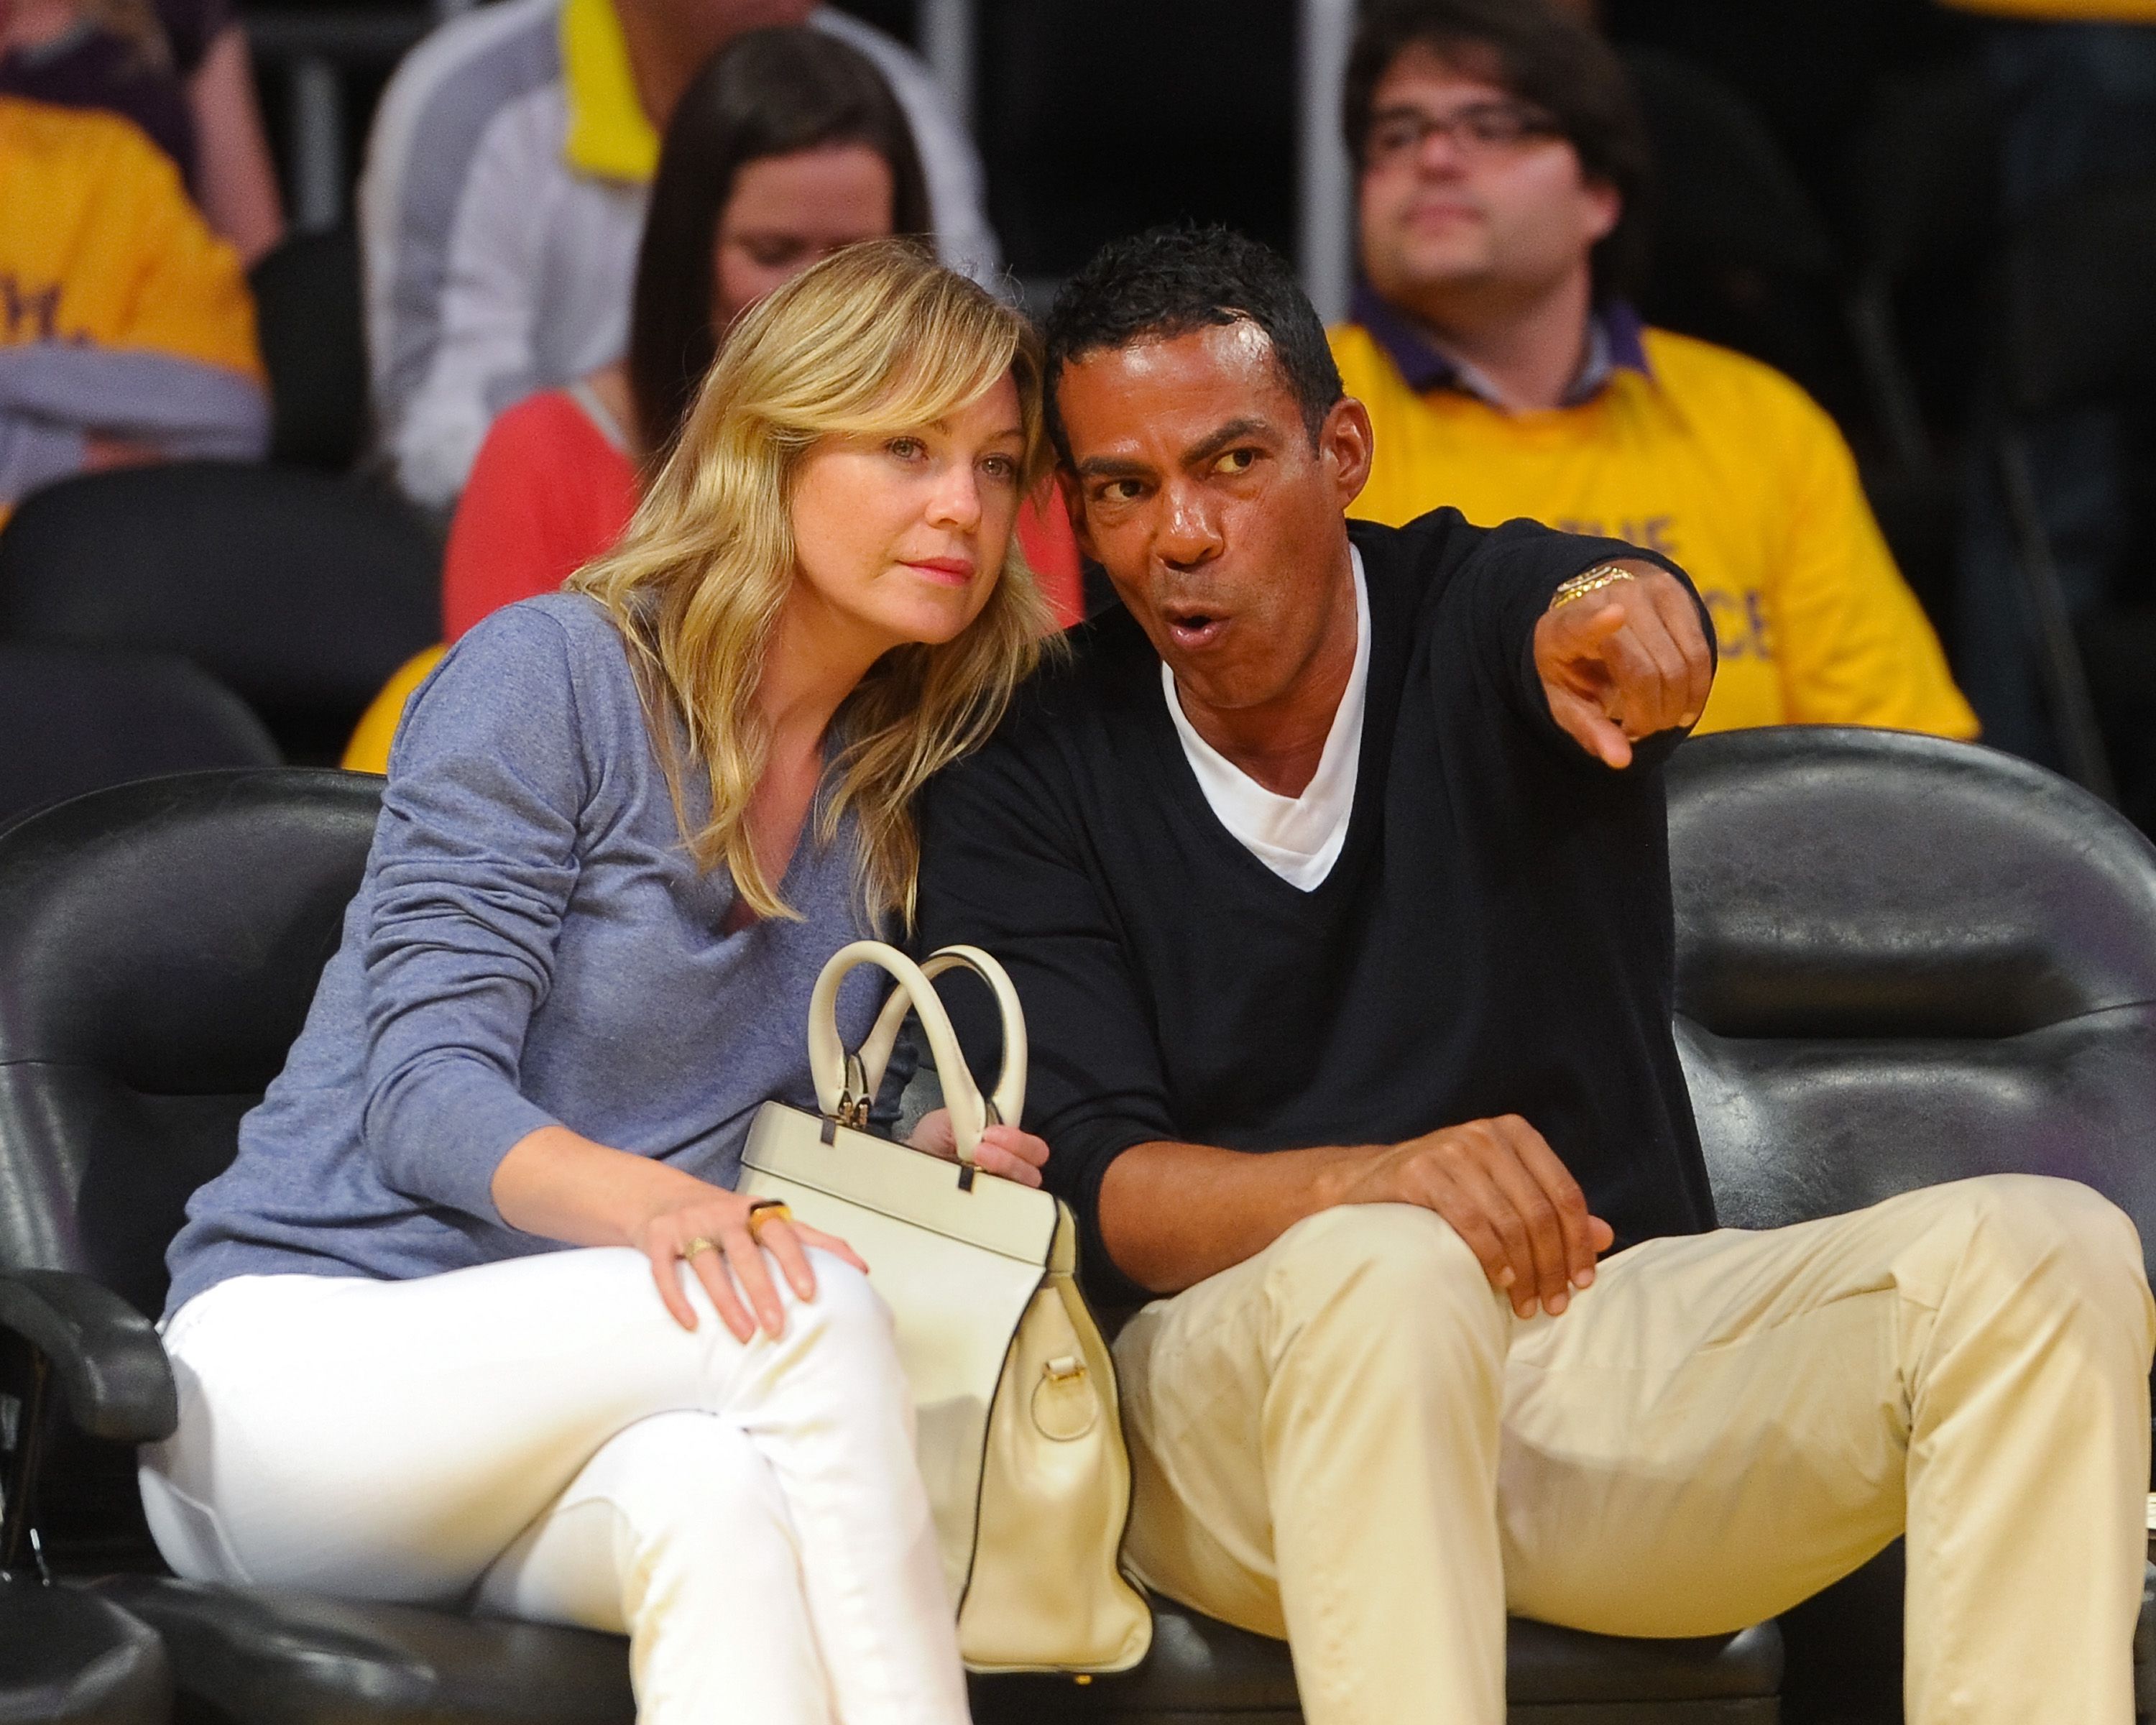 Ellen Pompeo and husband Chris Ivery at the Los Angeles Lakers and Oklamhoma City Thunder Game 3 in the 2012 NBA Playoffs on May 18, 2012 in Los Angeles, California | Photo: Getty Images